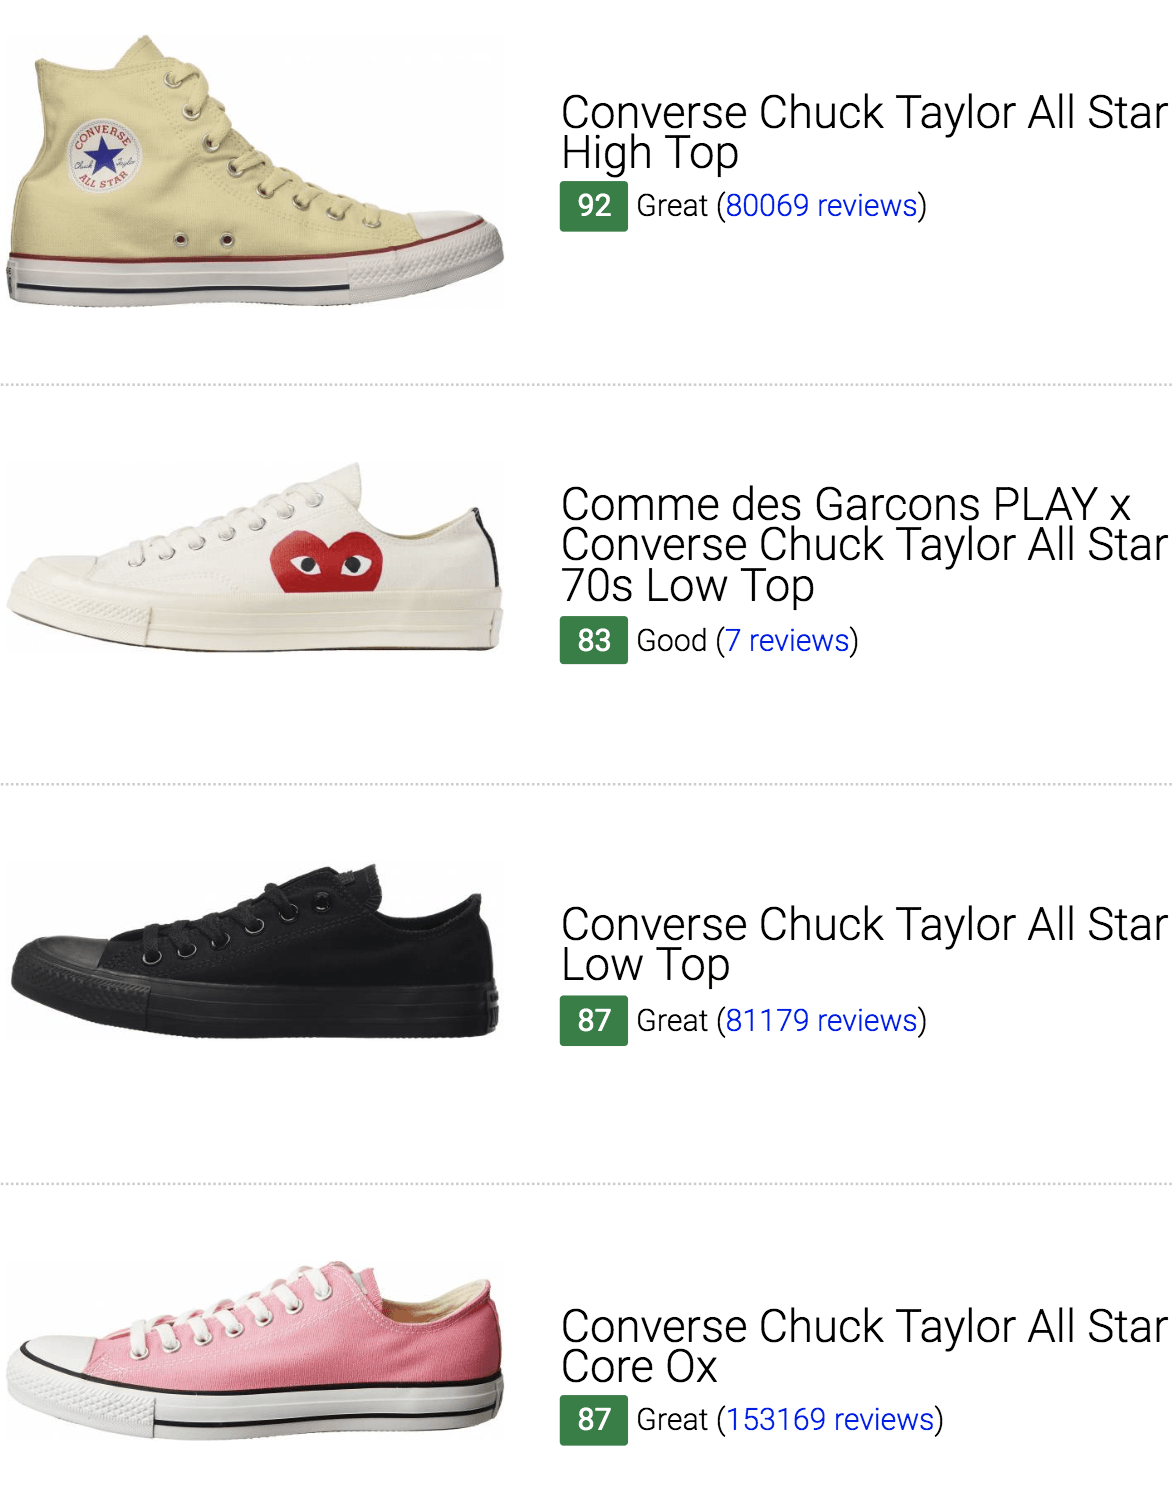 Best Converse Chuck Taylor All Star Sneakers 